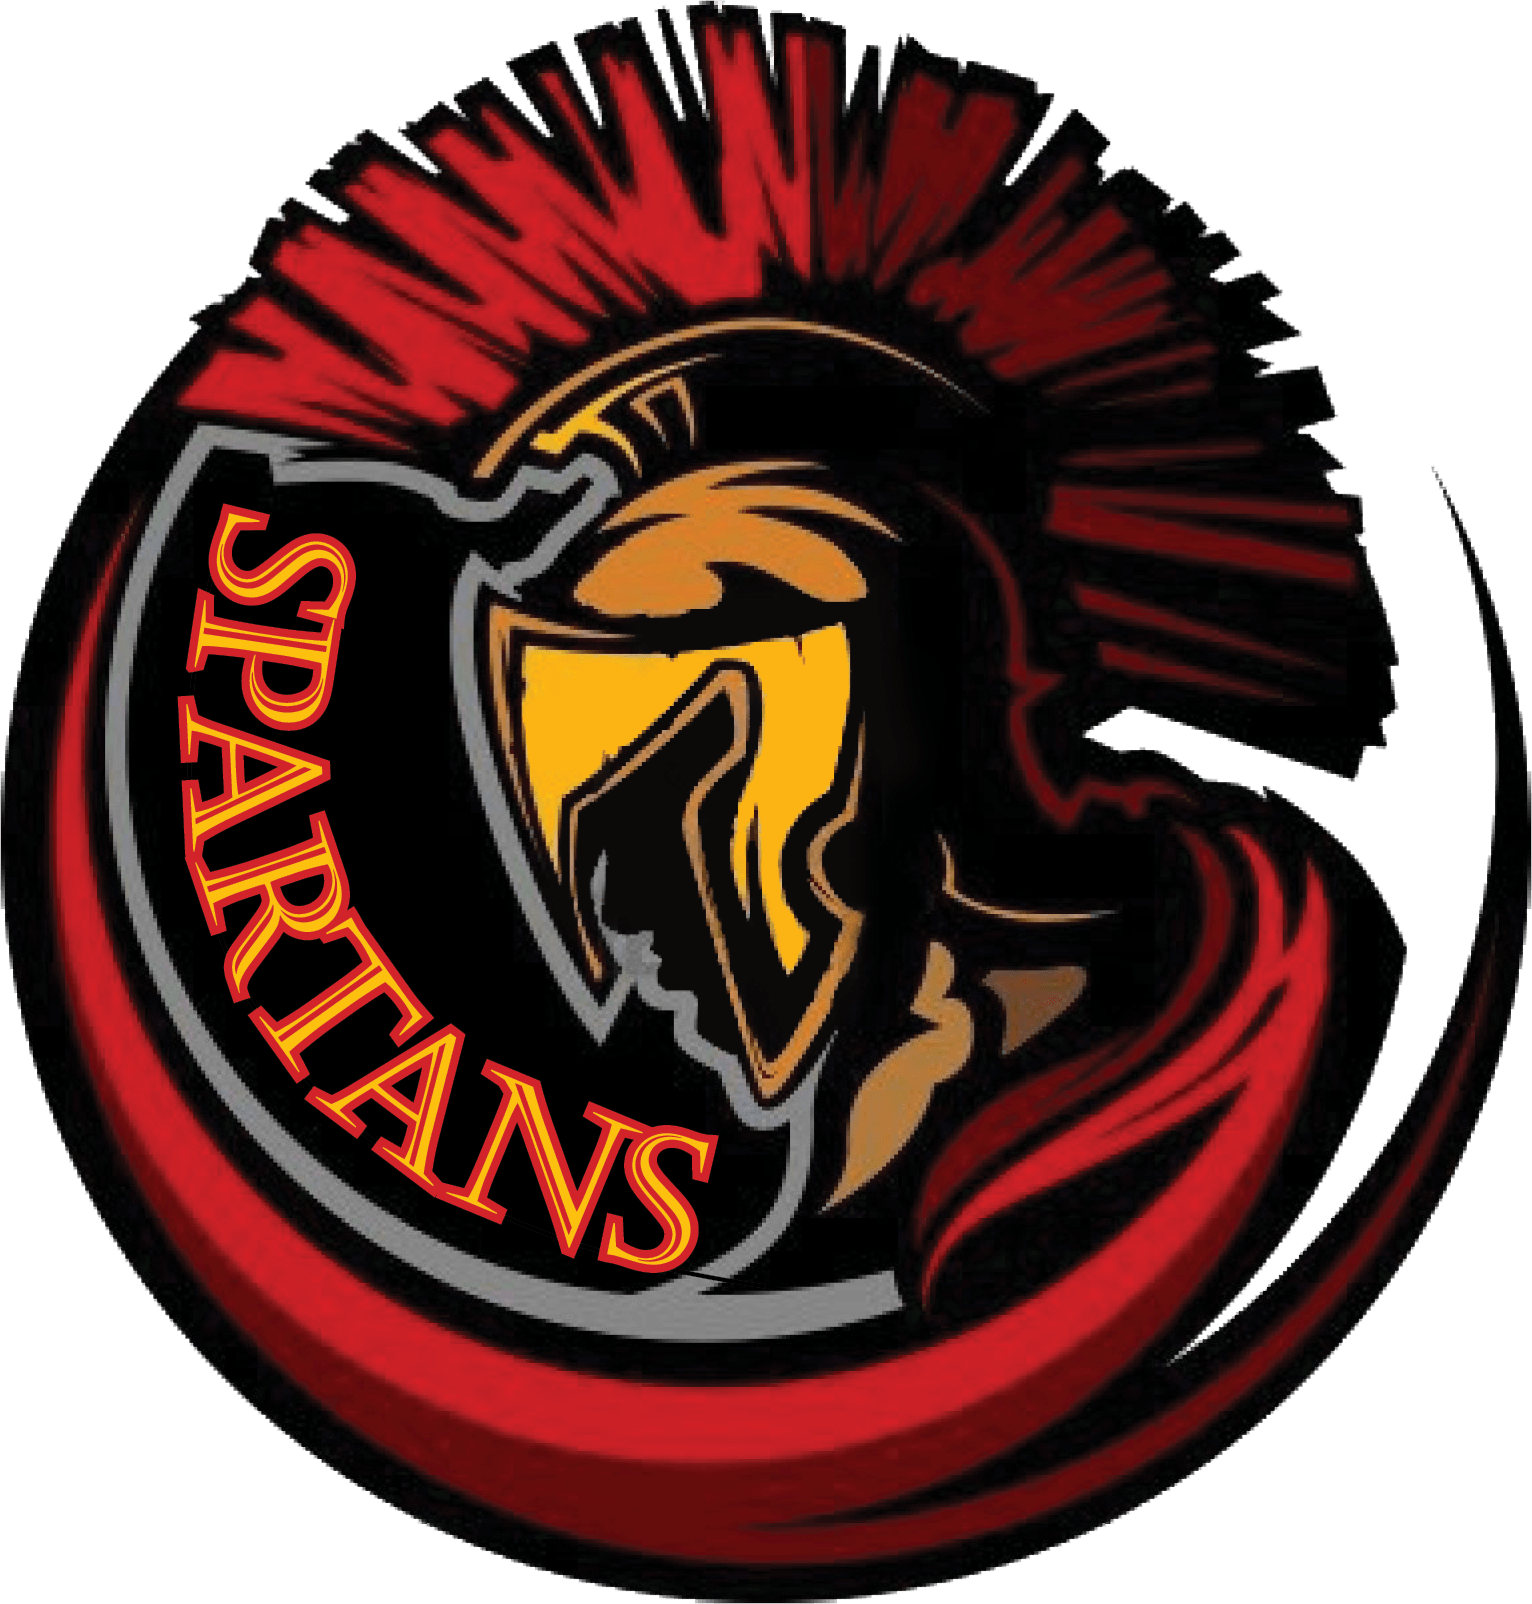 Spartans Logo - Image - Spartans Logo 2.png | Skatcity Wiki | FANDOM powered by Wikia